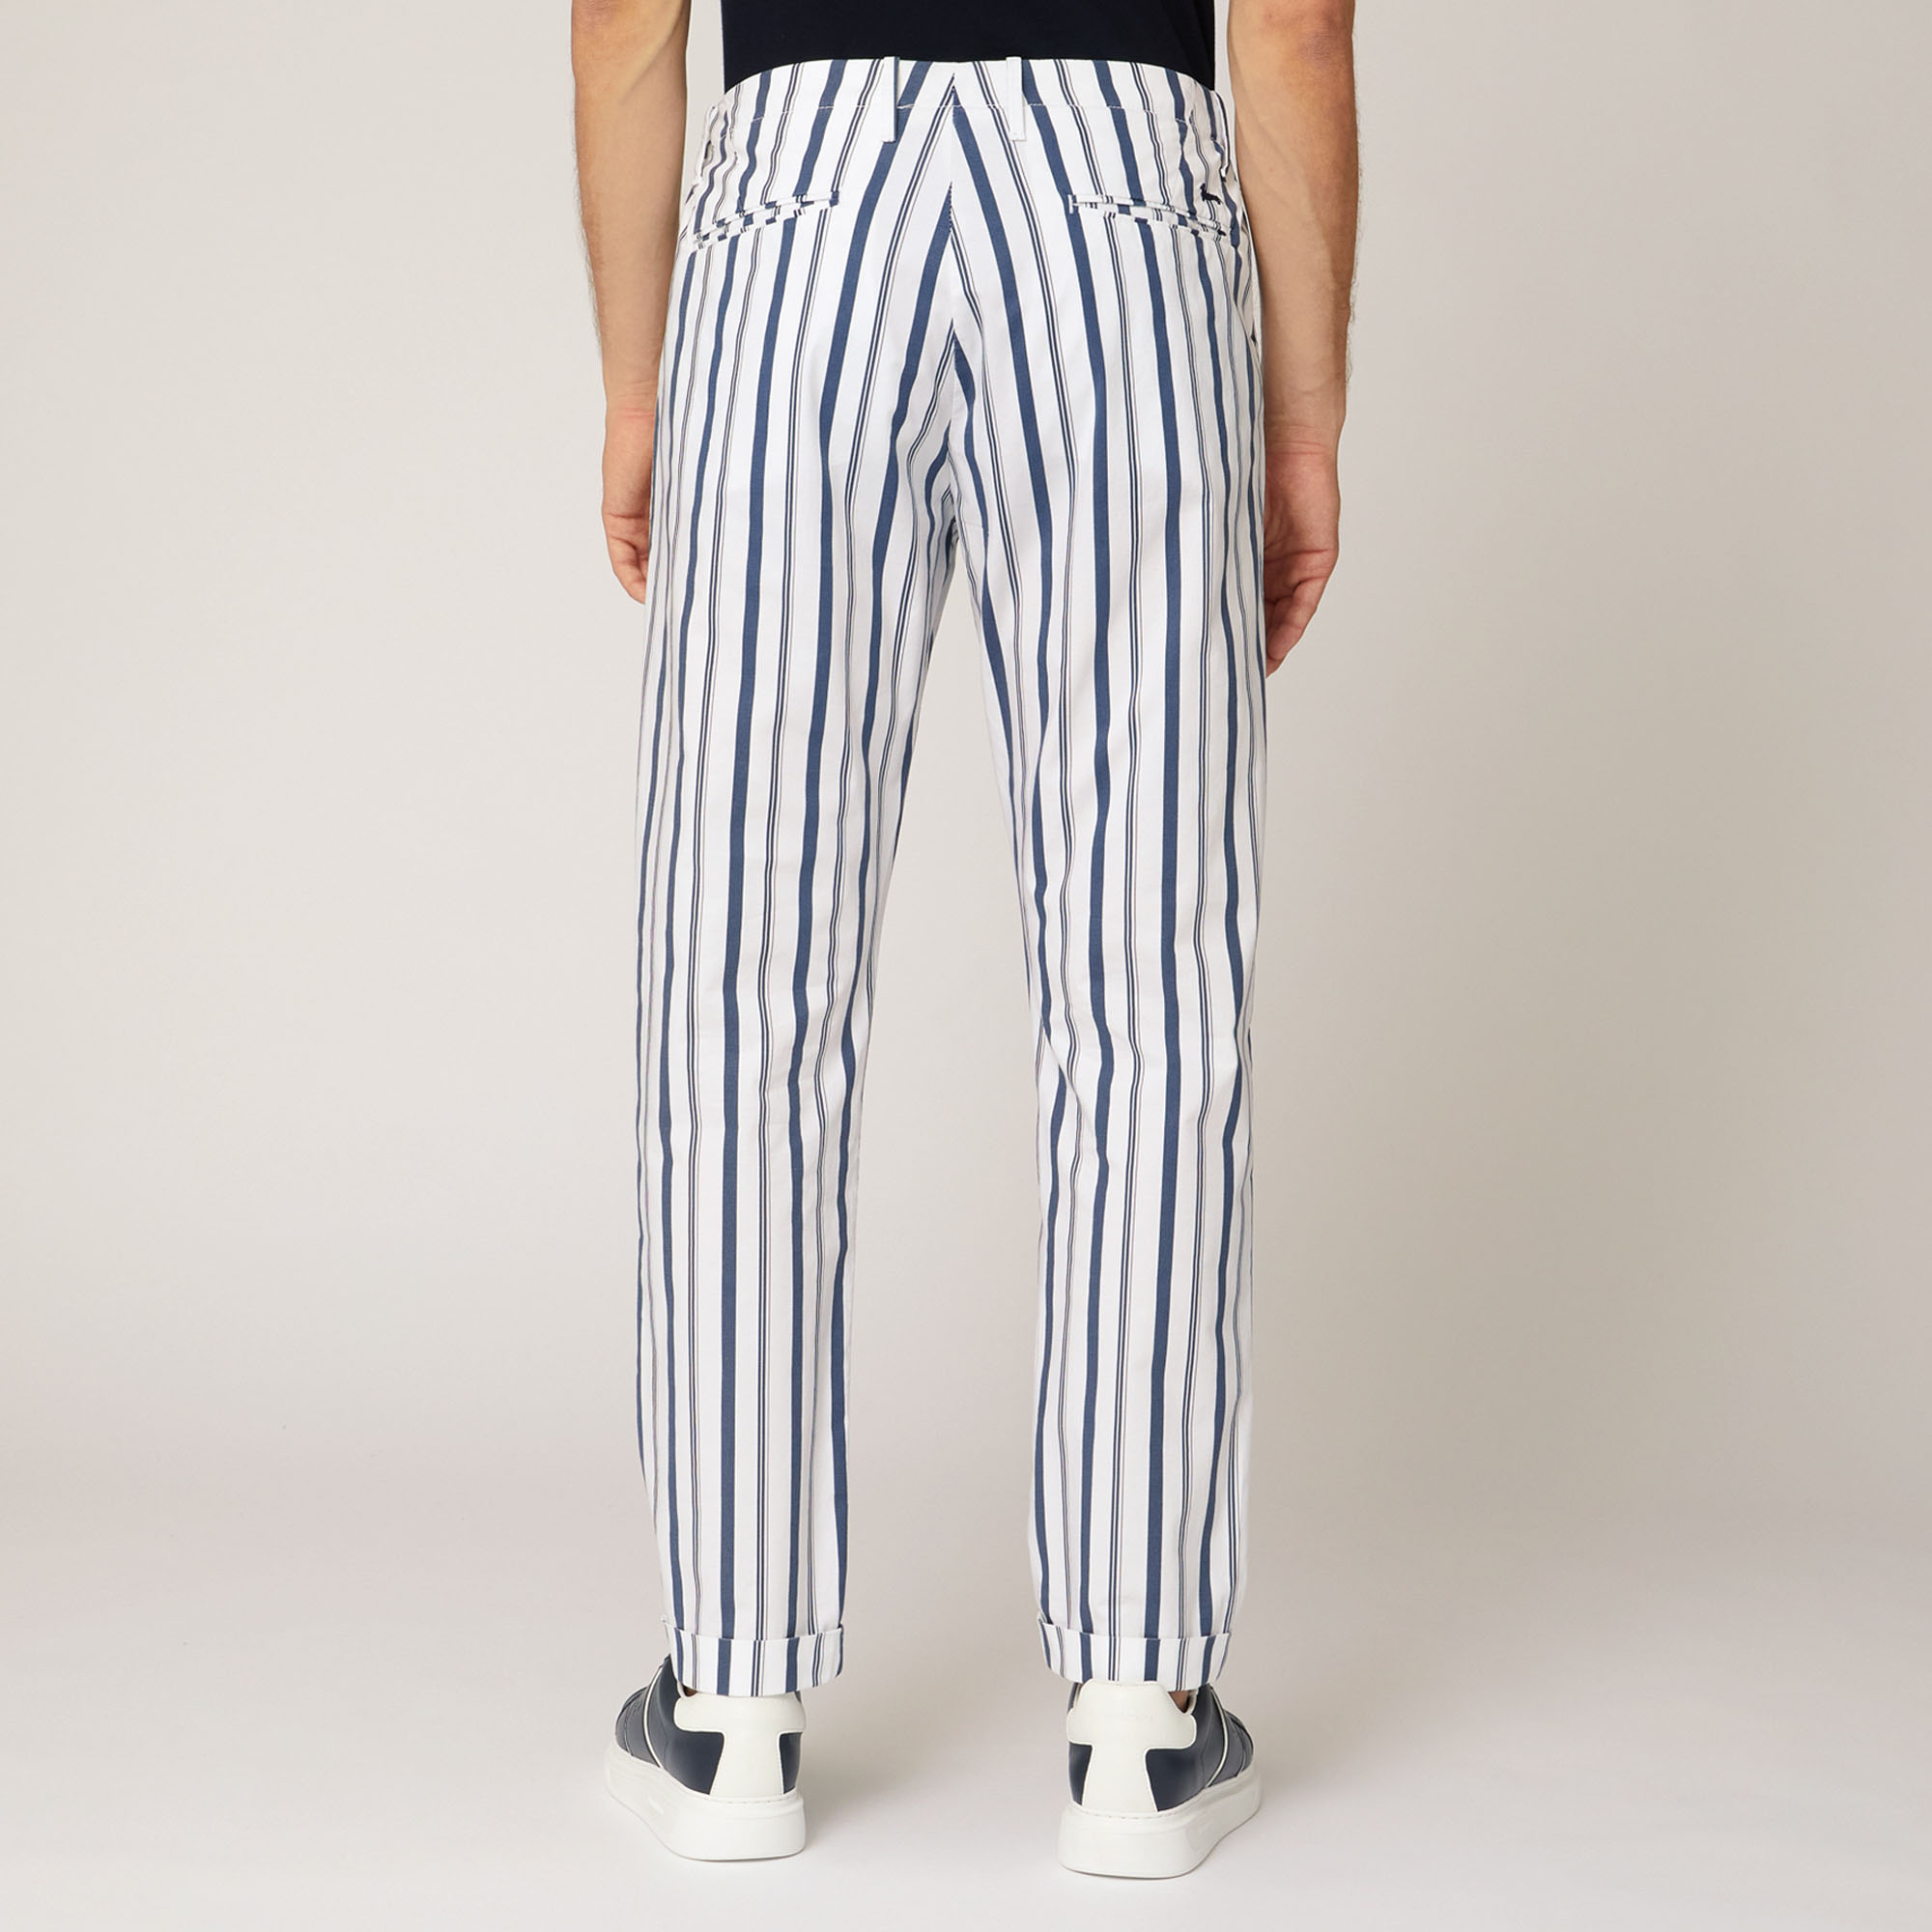 Striped Chino Pants, White, large image number 1